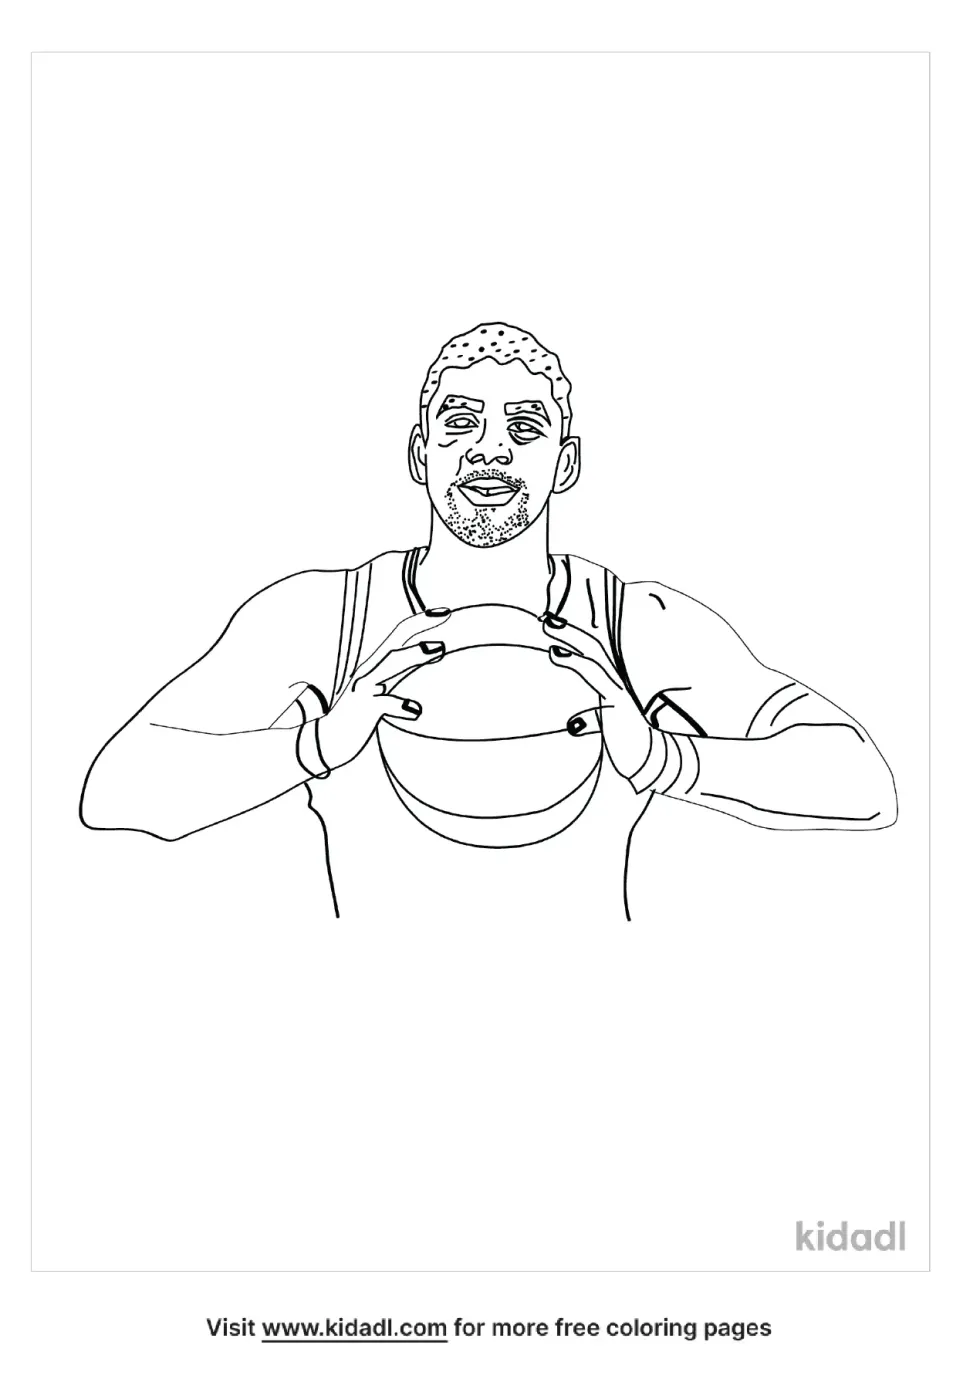 Kyrie Irving Coloring Page